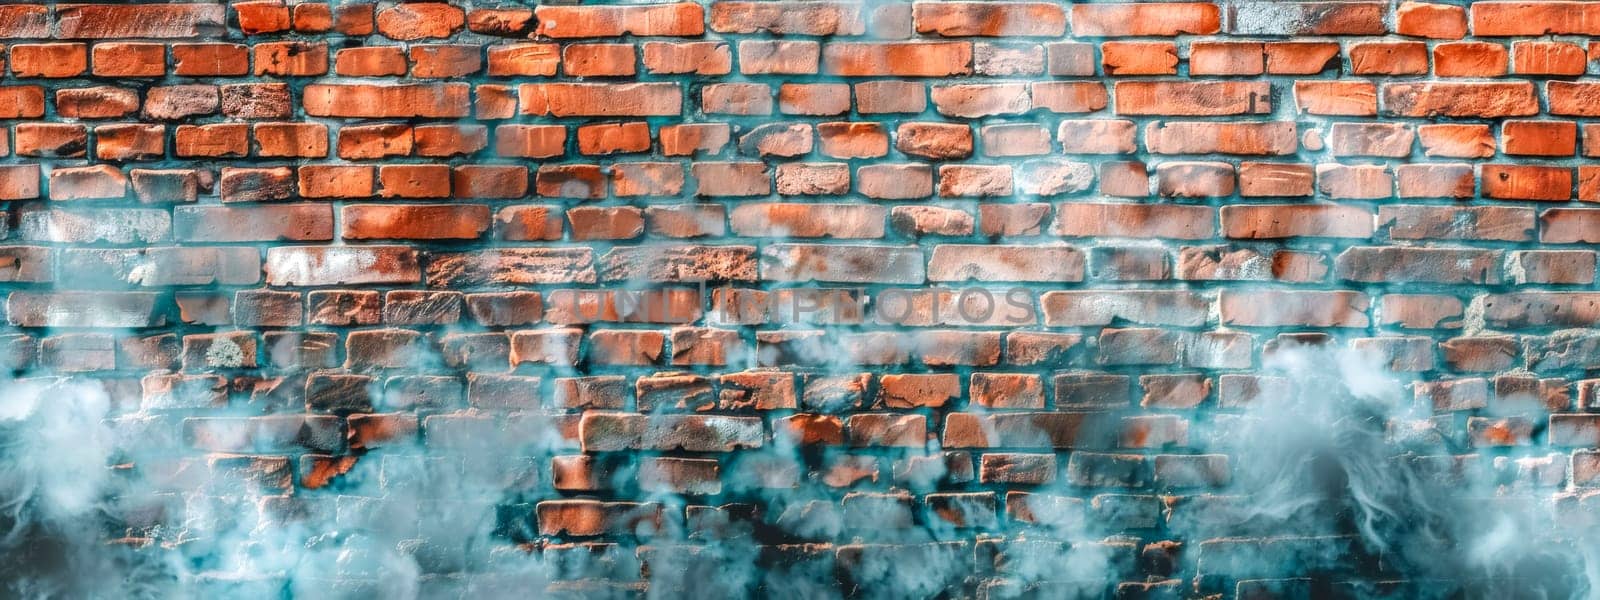 Vintage brick wall with ethereal mist by Edophoto